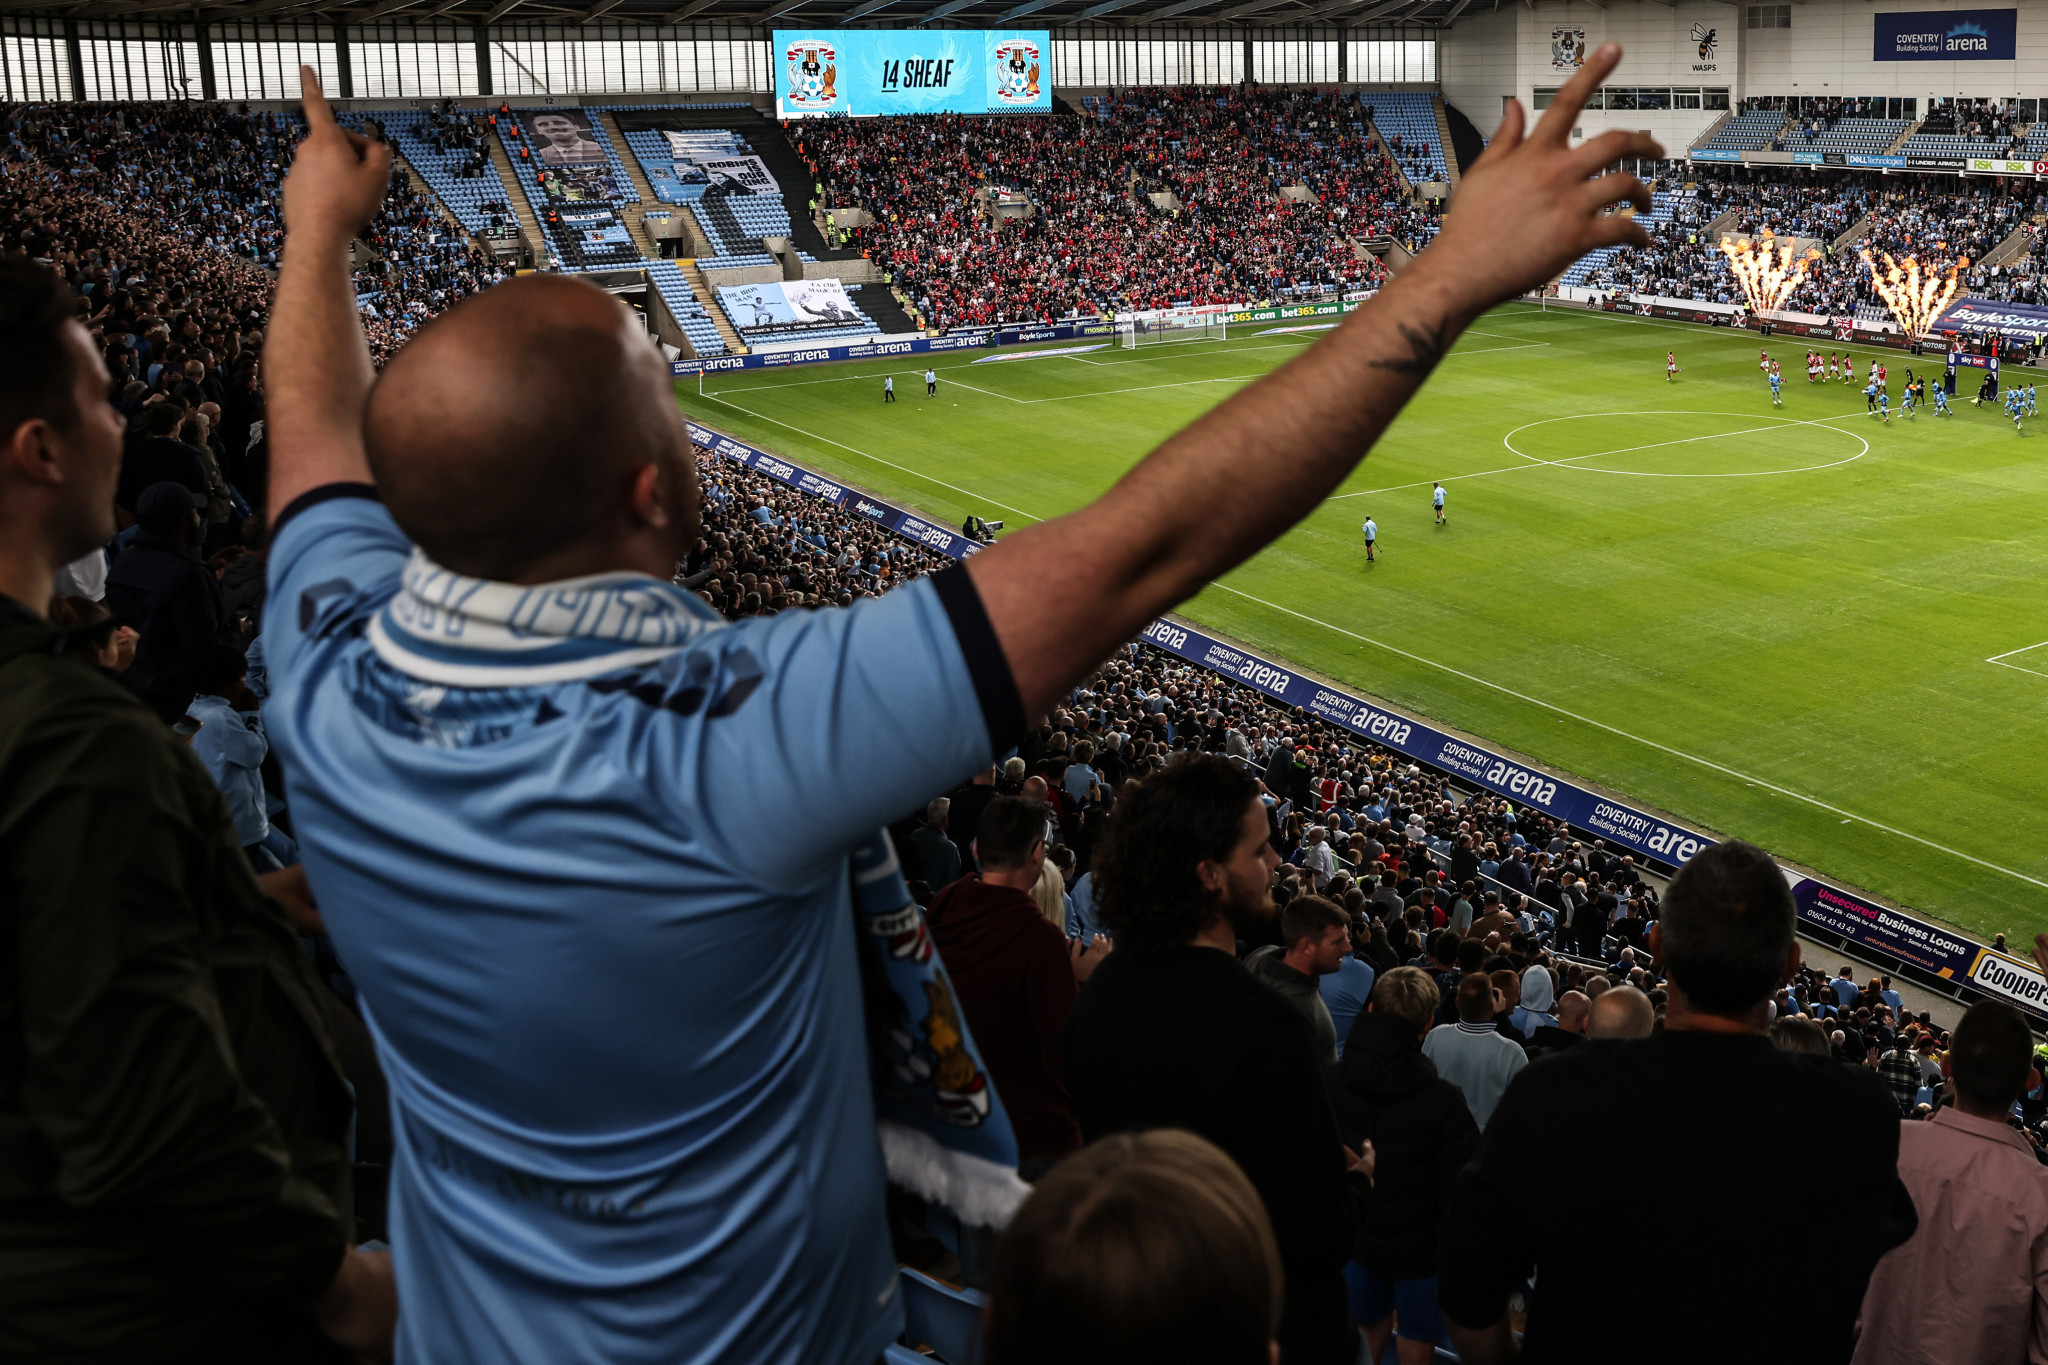 Coventry City play first home match after pitch damage during Birmingham 2022